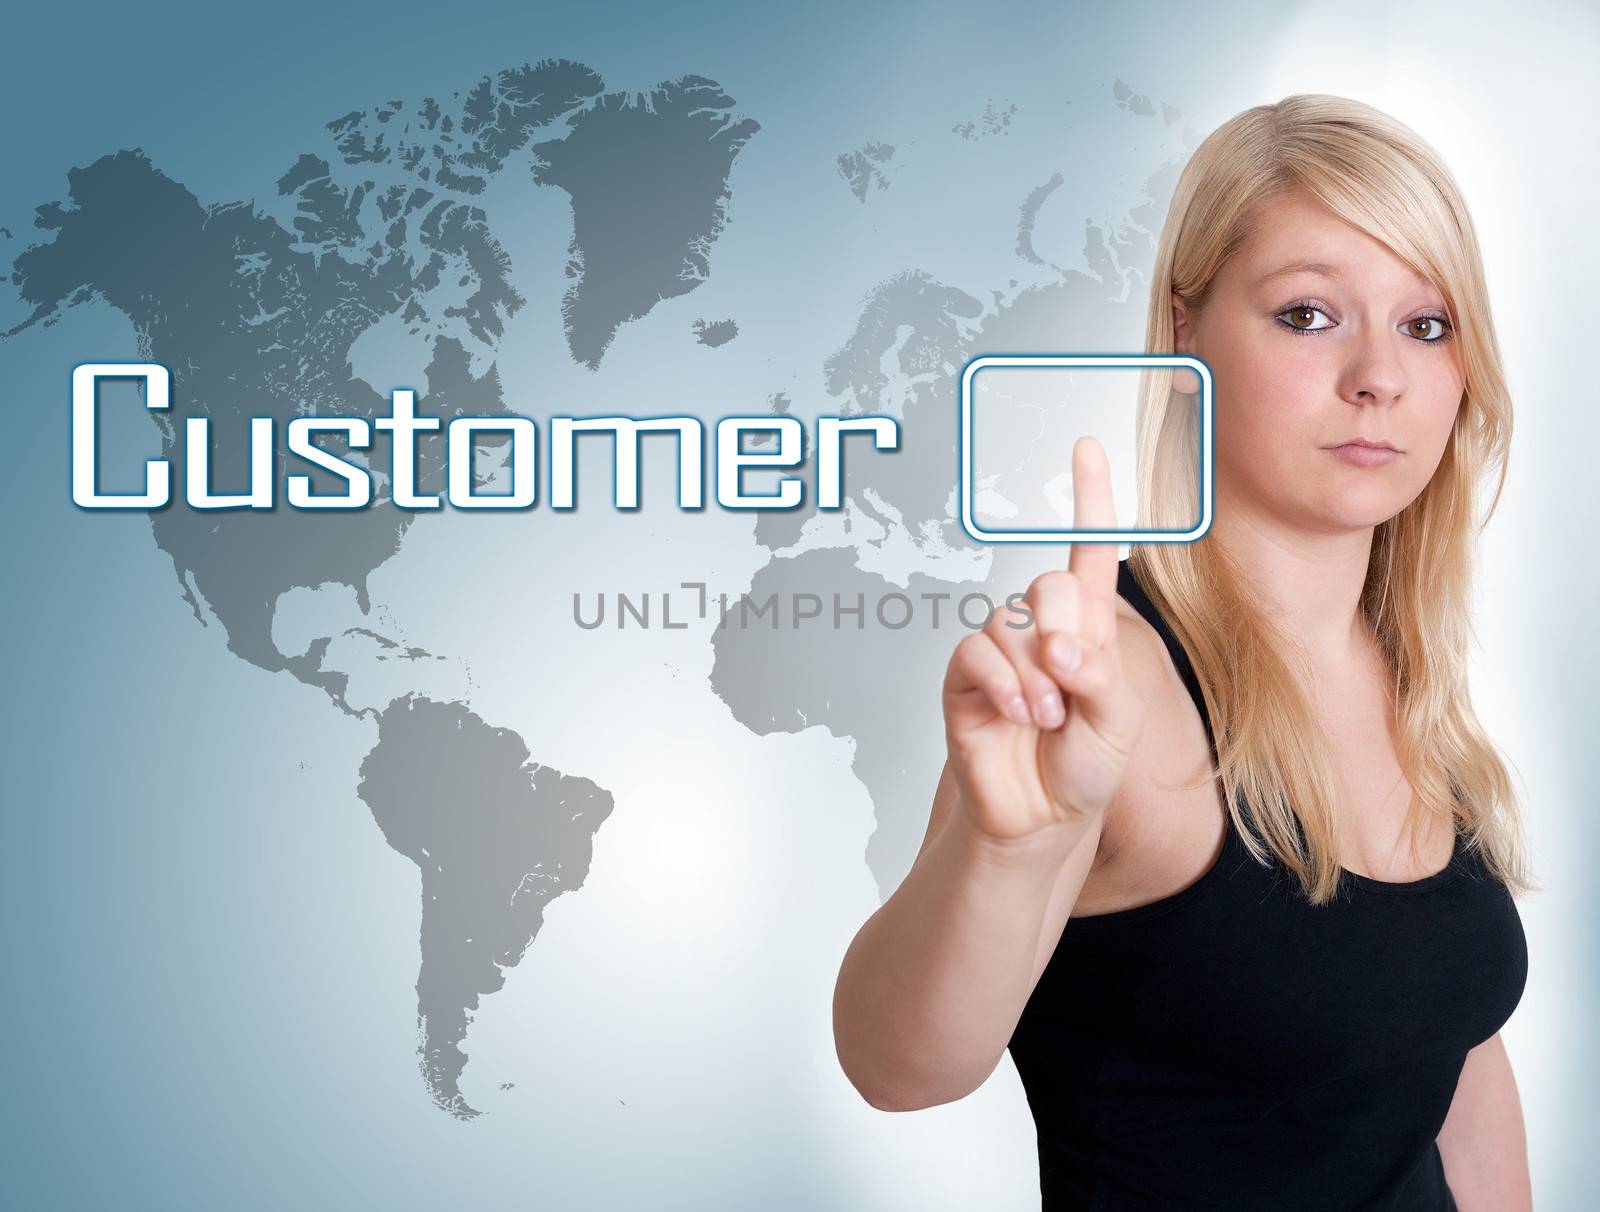 Young woman press digital Customer button on interface in front of her